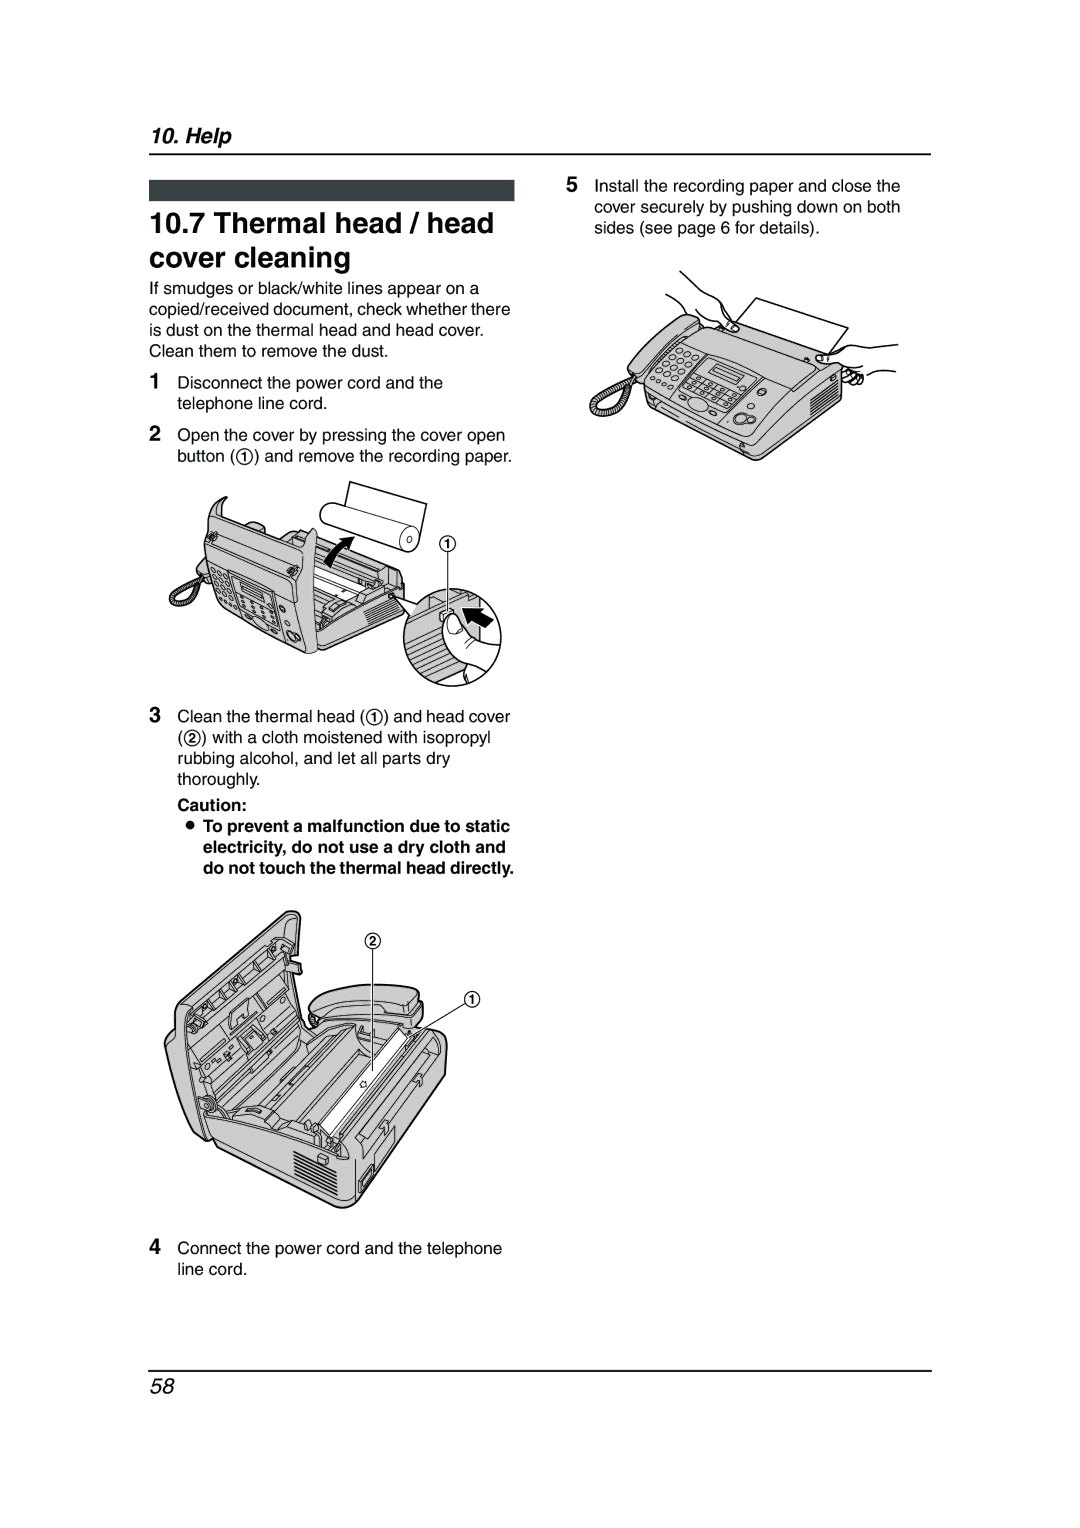 Panasonic KX-FT901BX manual Thermal head / head cover cleaning 